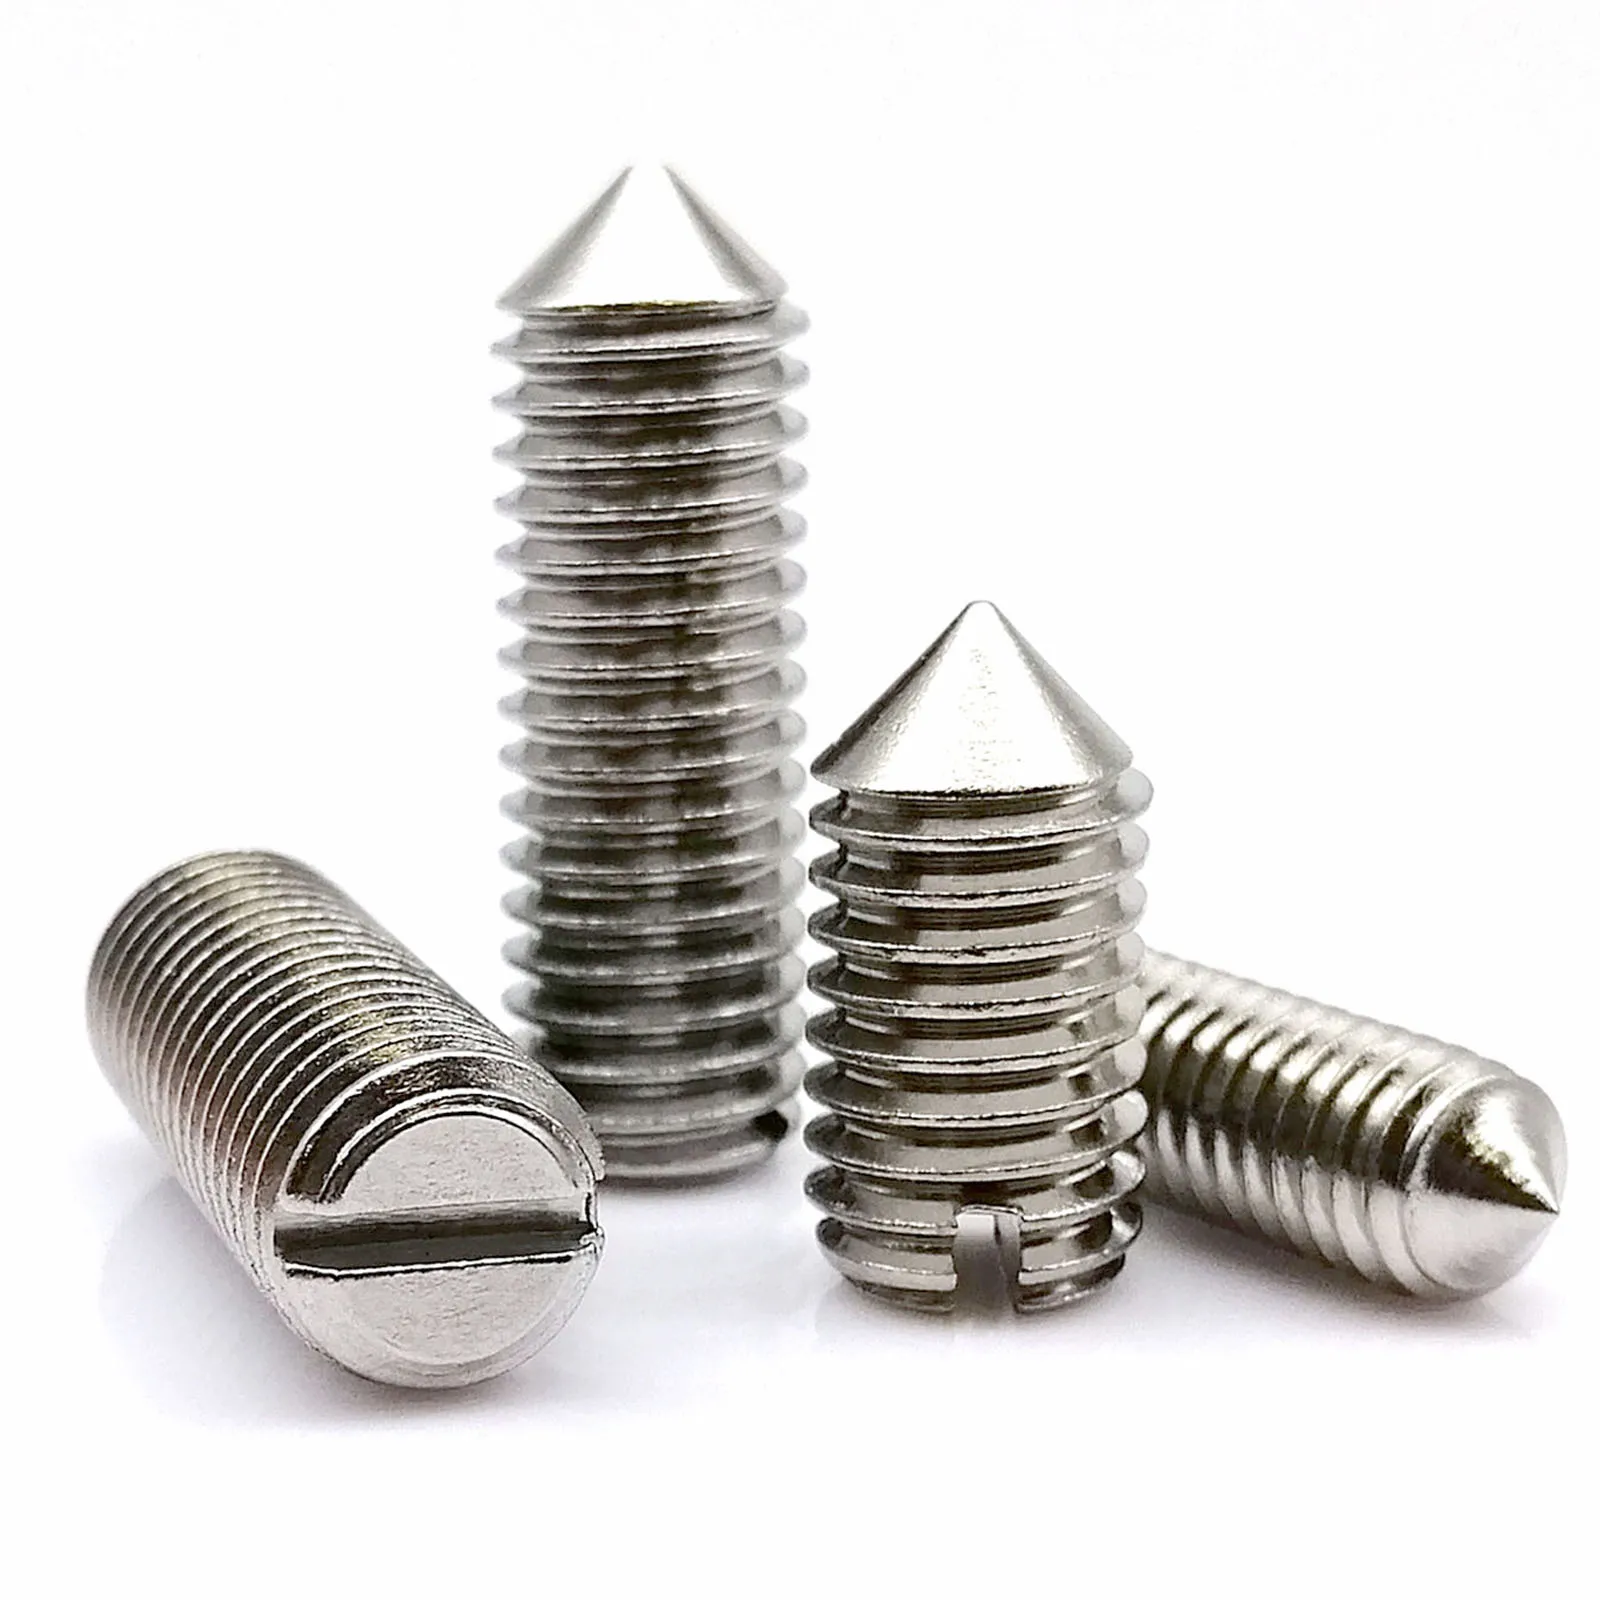 

M1.6 M2 M2.5 M3 M4 M5 M6 M8 M10 GB71 304 A2-70 Stainless Steel Slotted Head Cone Point Tapered End Headless Grub Bolt Set Screw